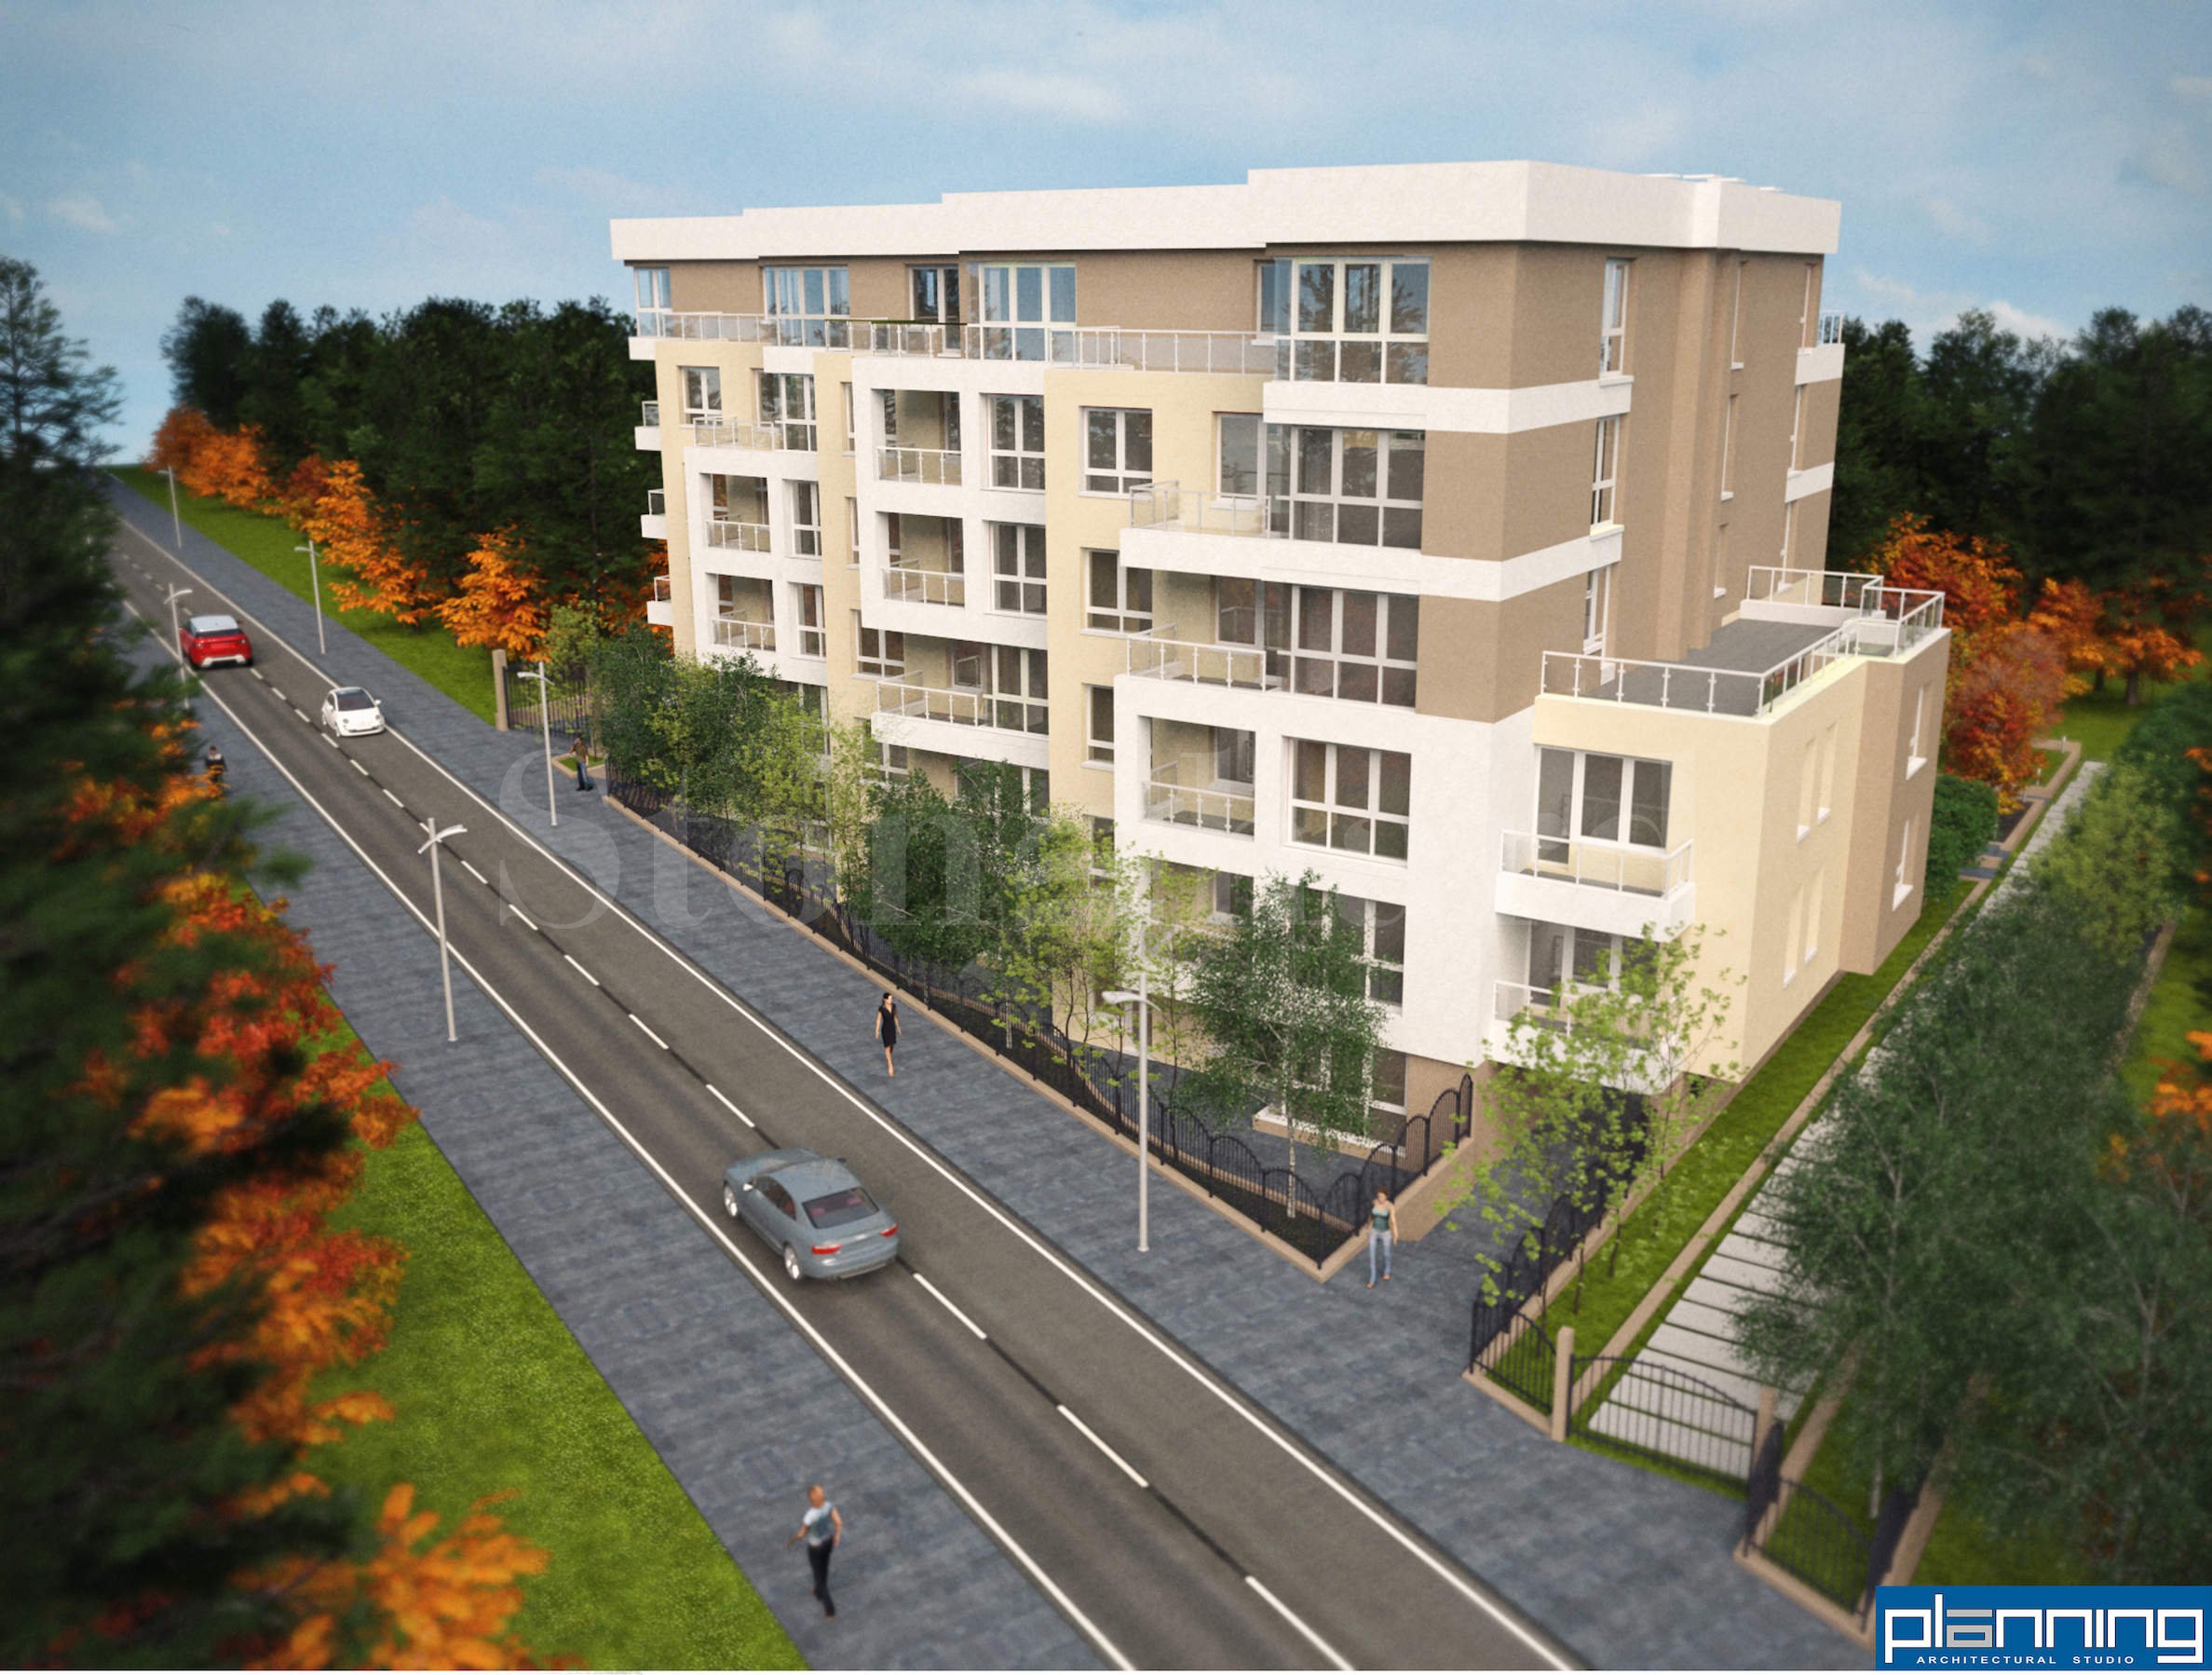 Modern gated complex with new apartments and many amenities in Vitosha District1 - Stonehard